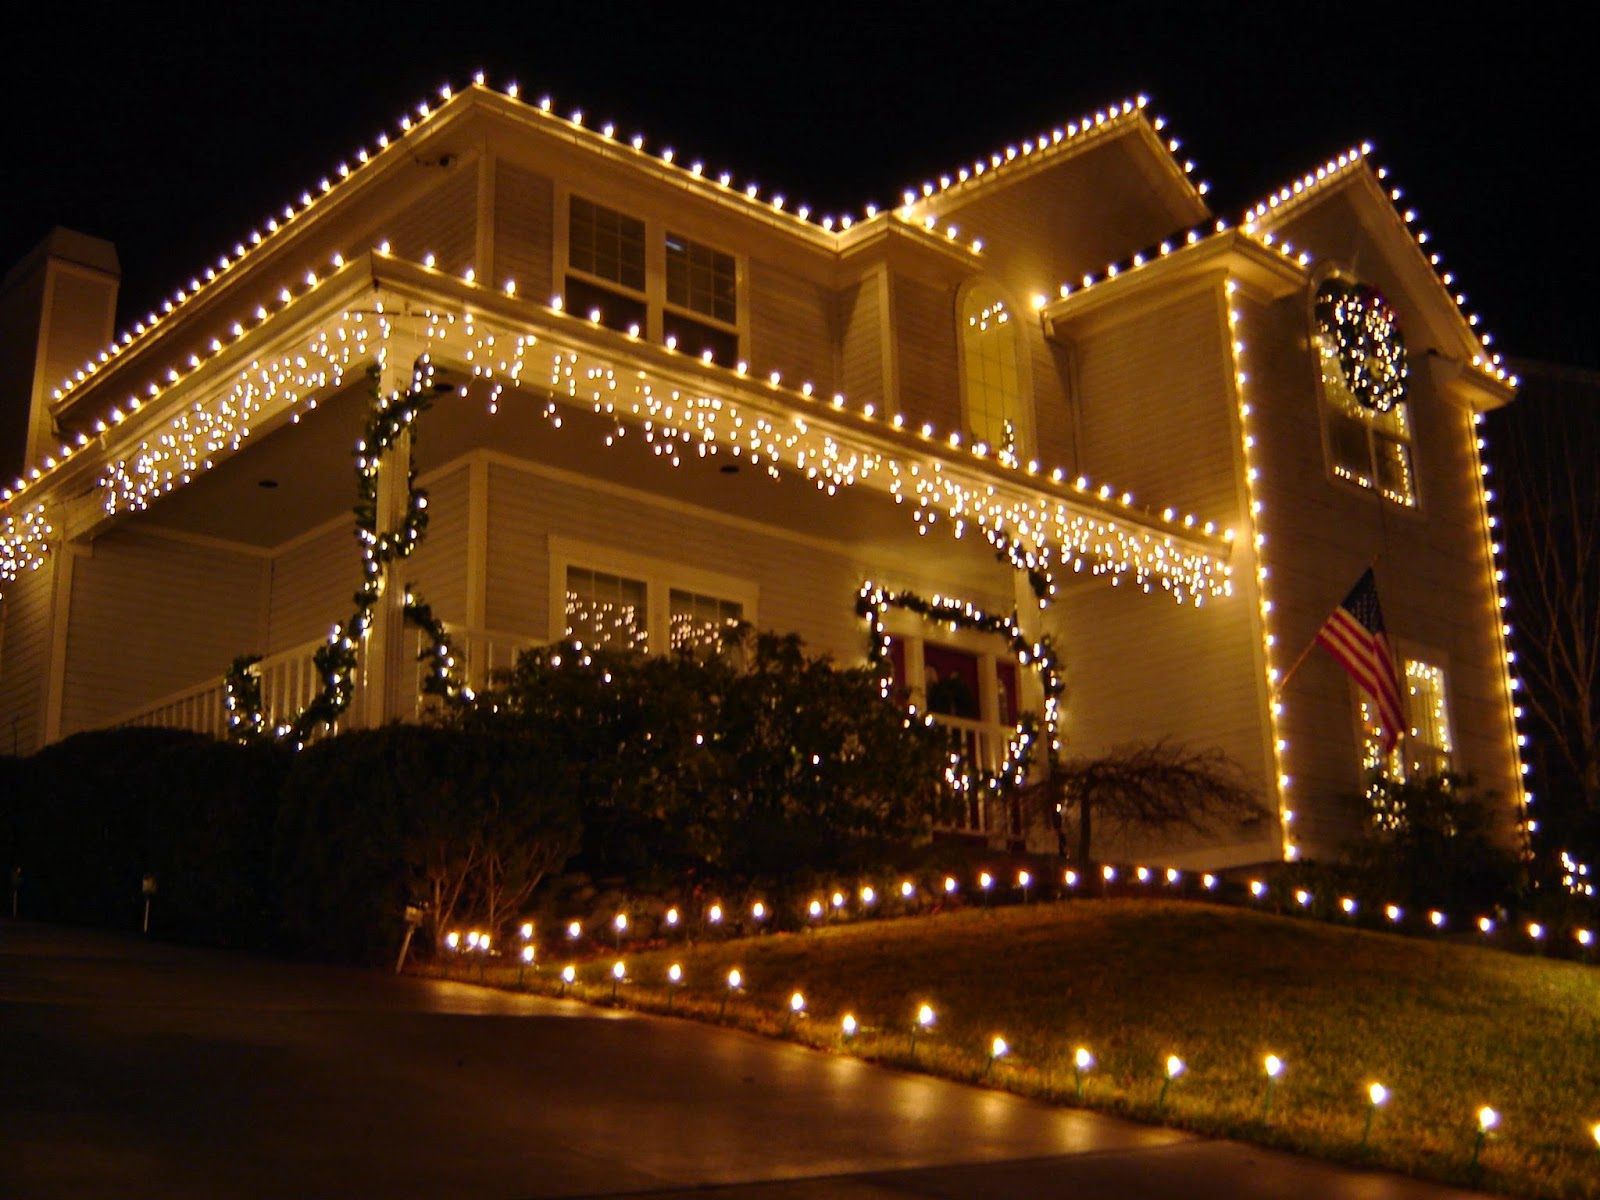 Christmas Lights Installation Service in Chicagoland and Suburbs